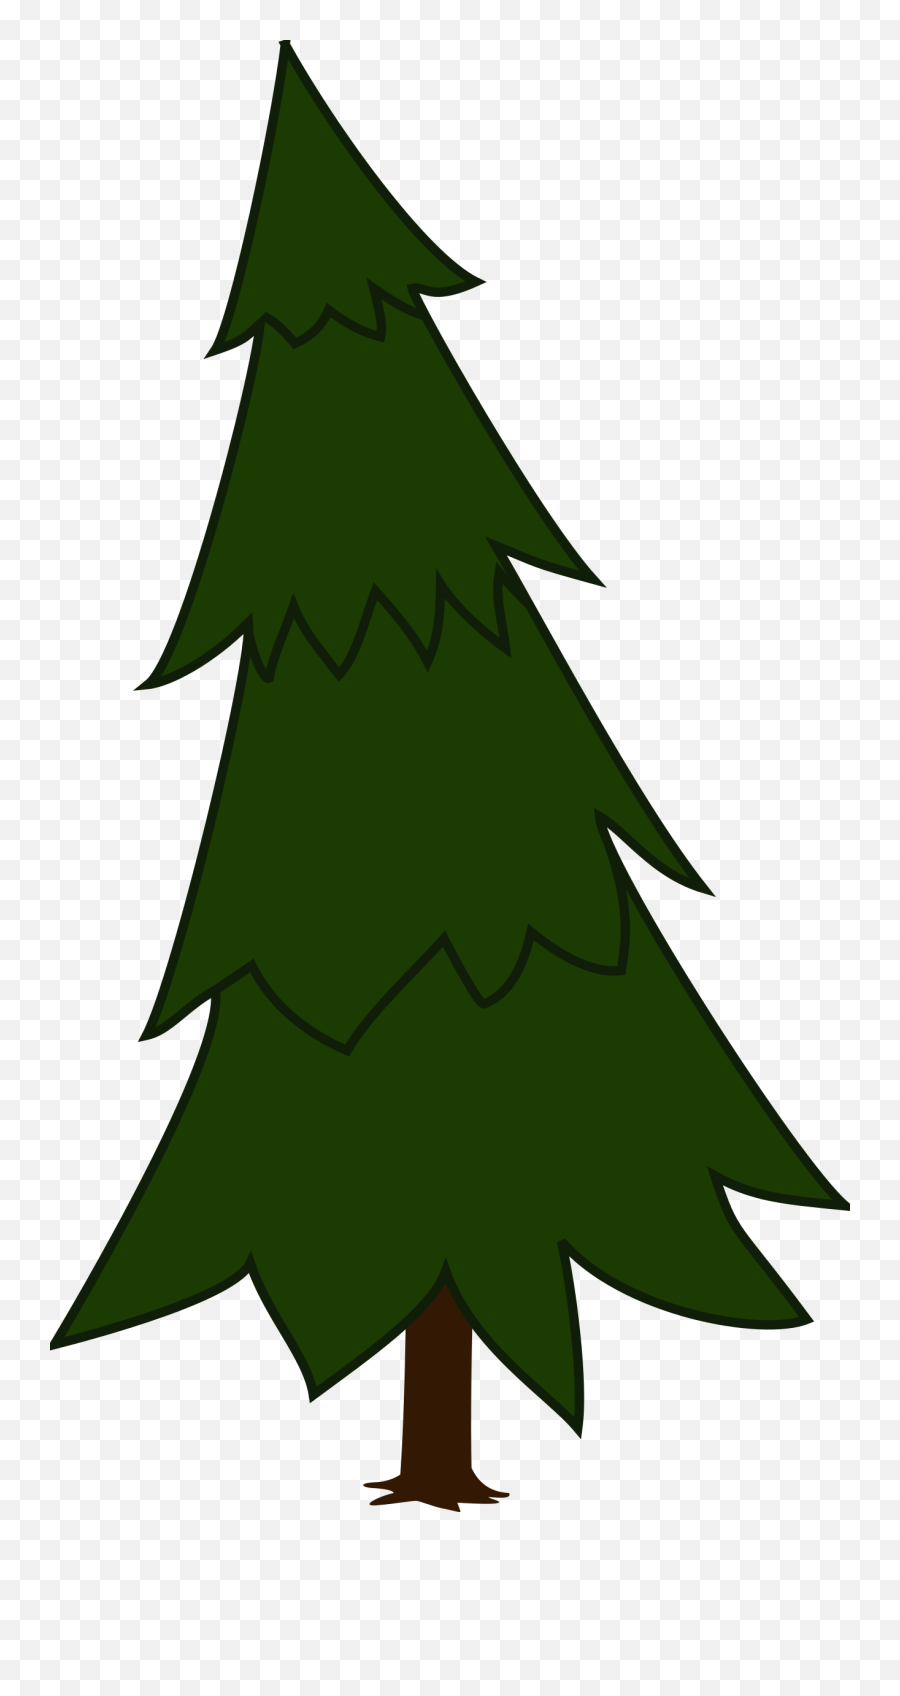 Spruce Tree Silhouette - Pine Tree Animated Png,Christmas Tree Silhouette Png